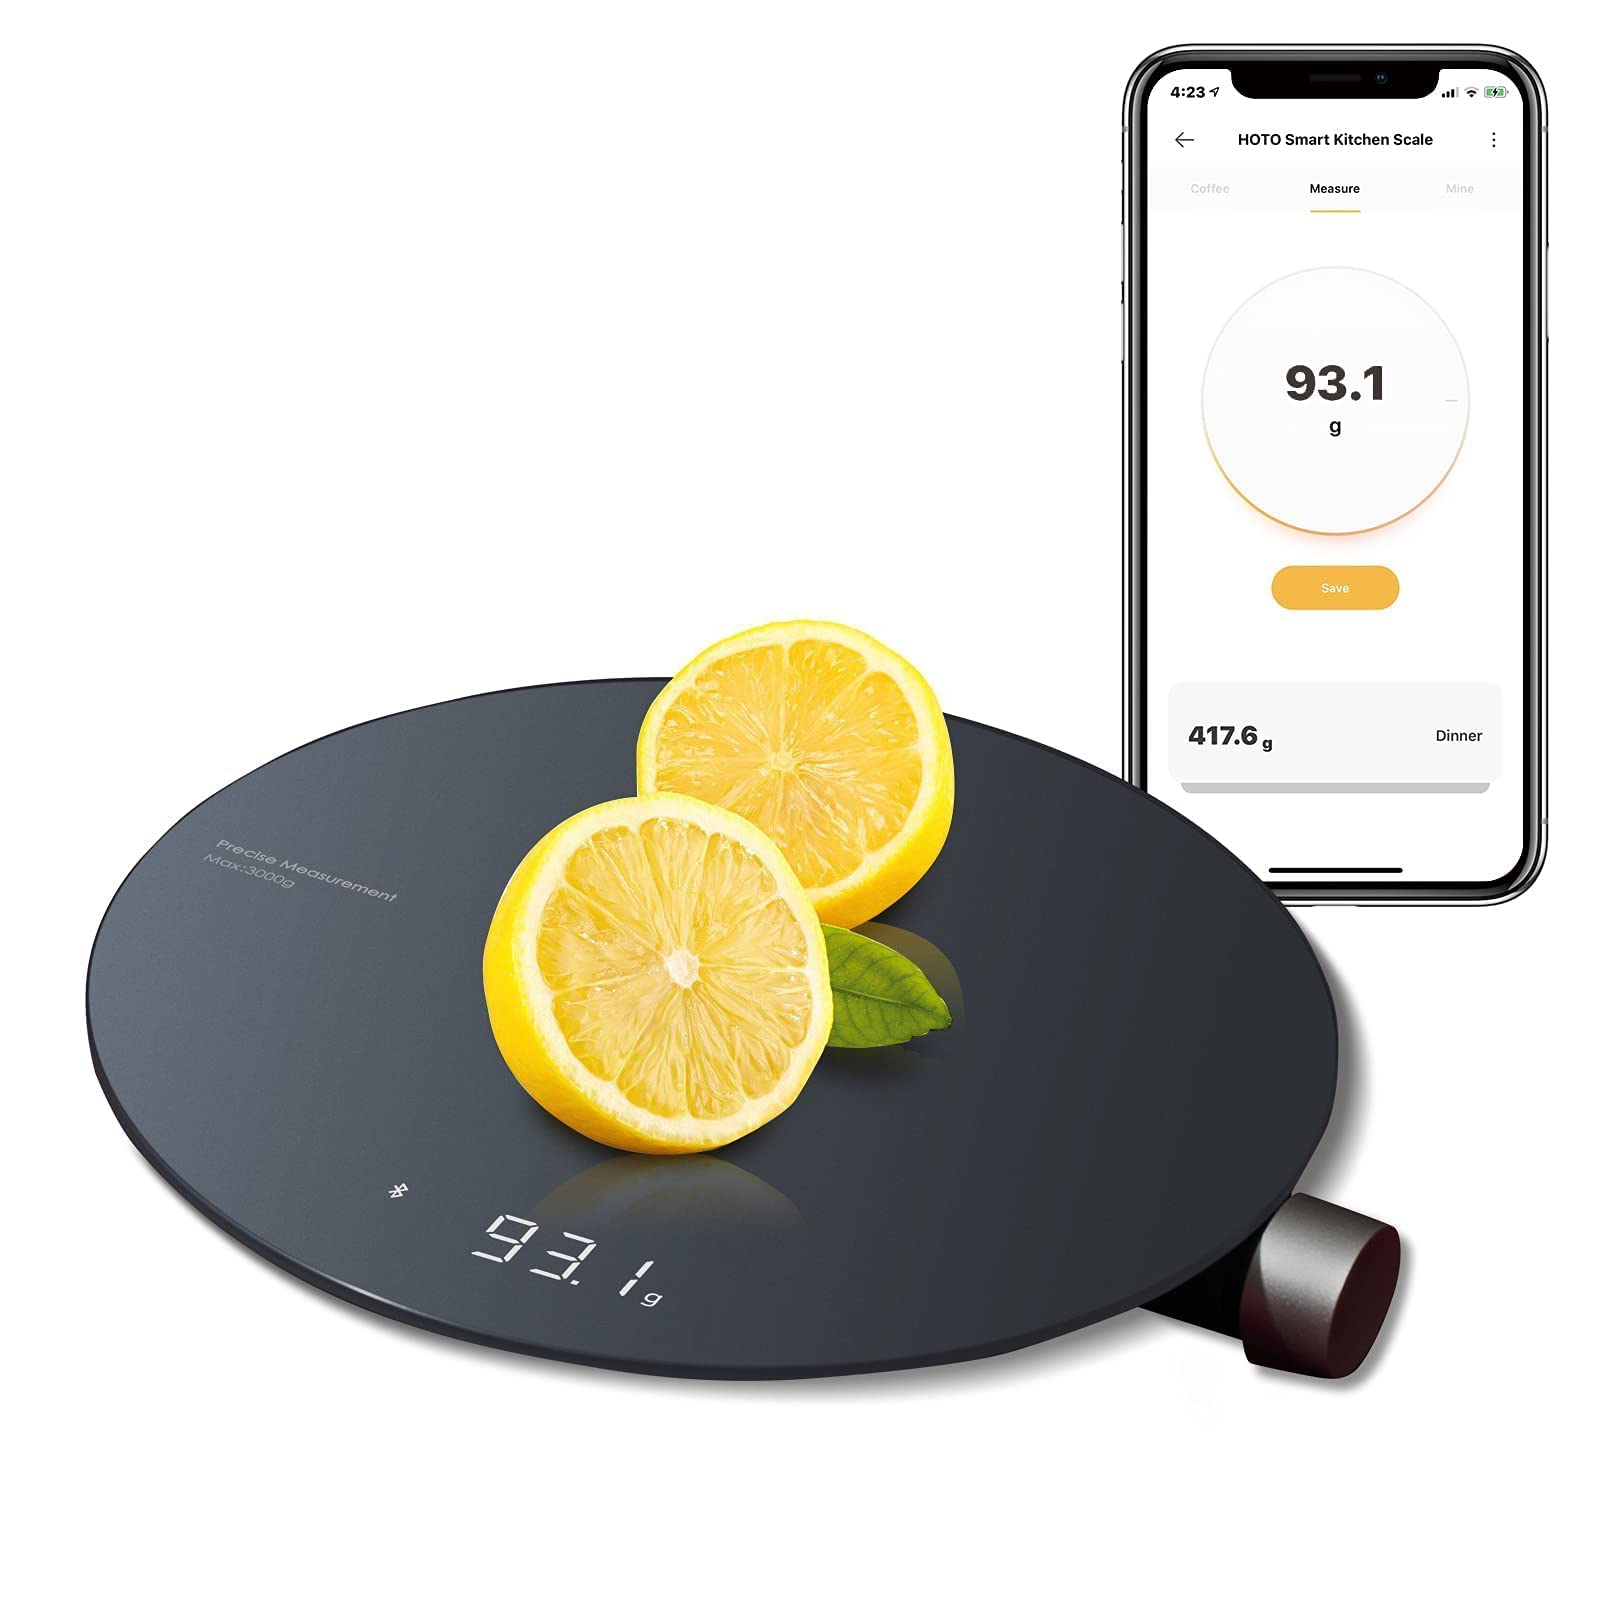 HOTO Smart Kitchen Scale QWCFC001 Stylish Bluetooth Kitchen Scale with LCD Display, 4 Units of Measurement,Tare Function & Recipe Library App - Black